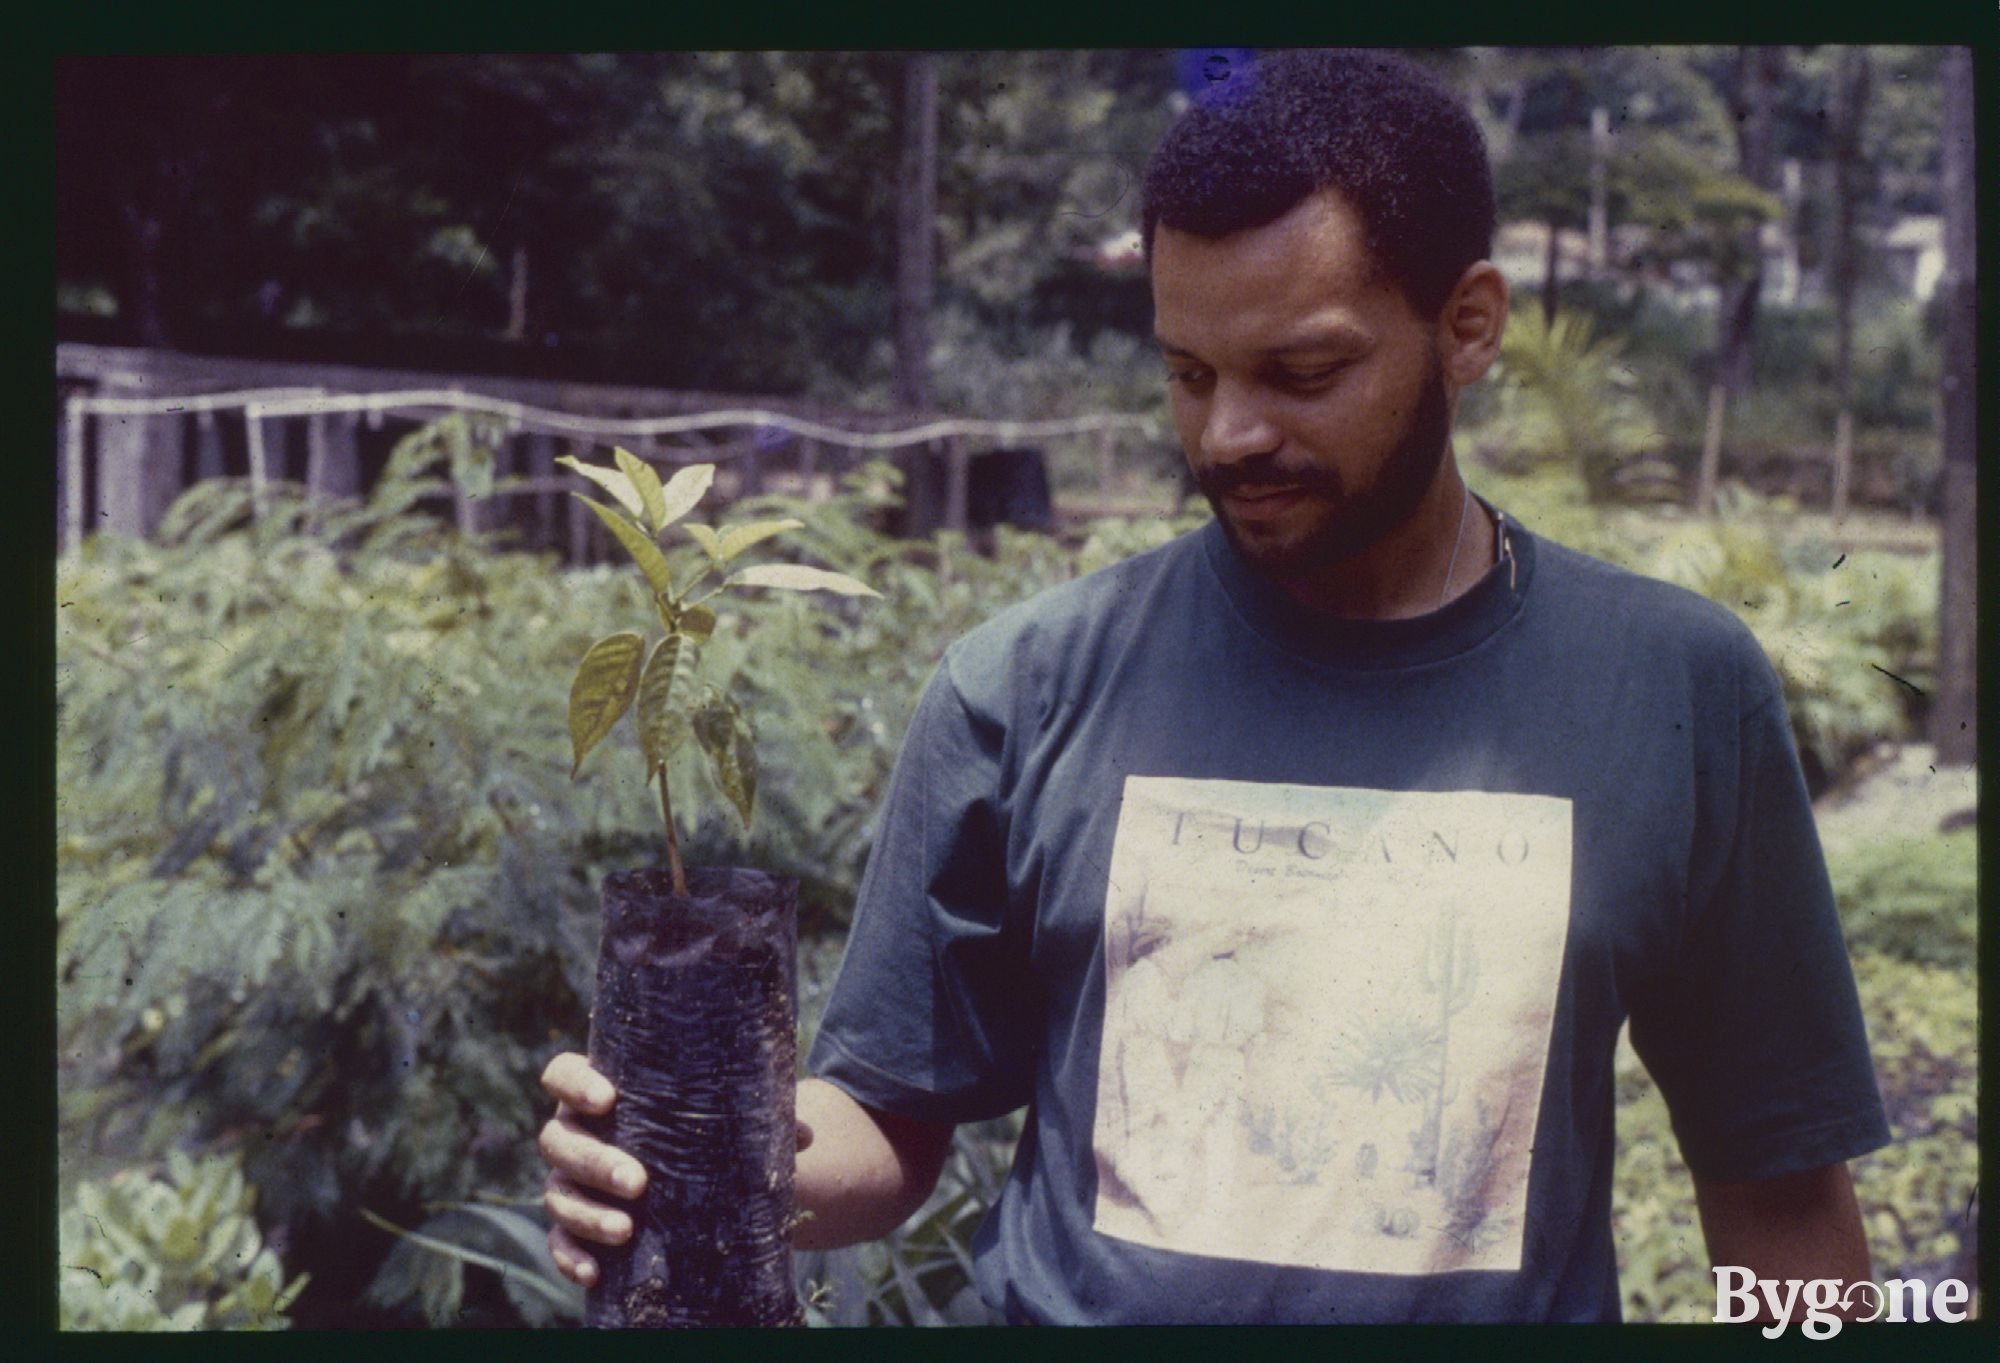 A young Black man with short dark afro hair and a close beard, is standing in a garden. He is wearing a shirt that reads Tucano, and is holding in his right hand a tree sapling. There are a handful of little leaves growing and its roots are wrapped in a thin sheet of plastic.